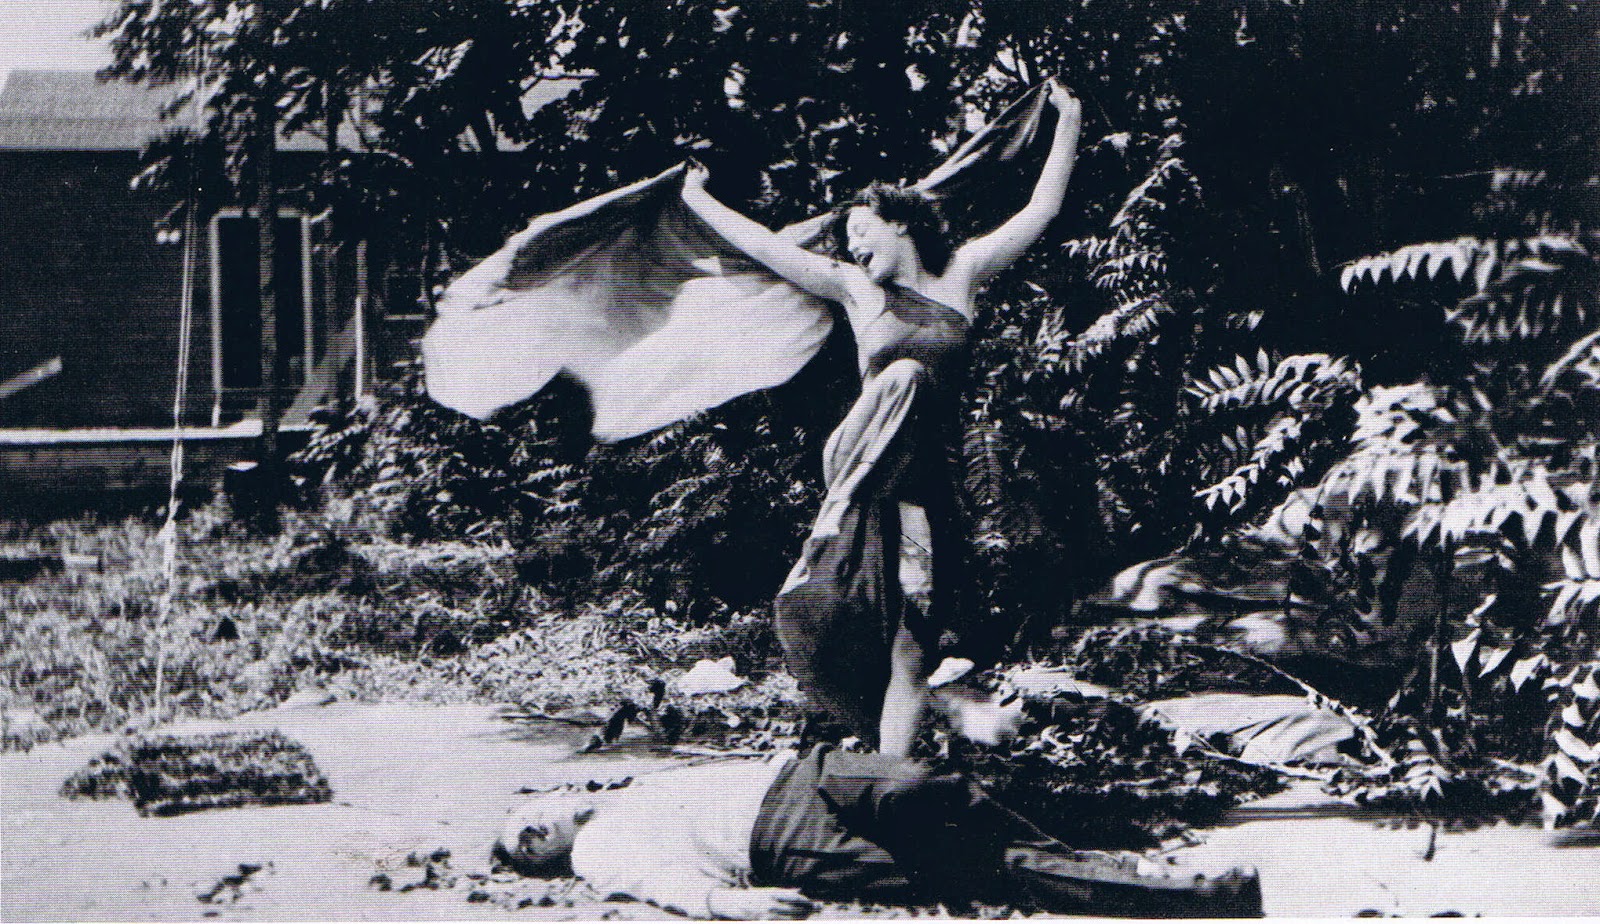 Still from the 1913 film The Vampire, picturing a female vampire standing over a man who she has defeated